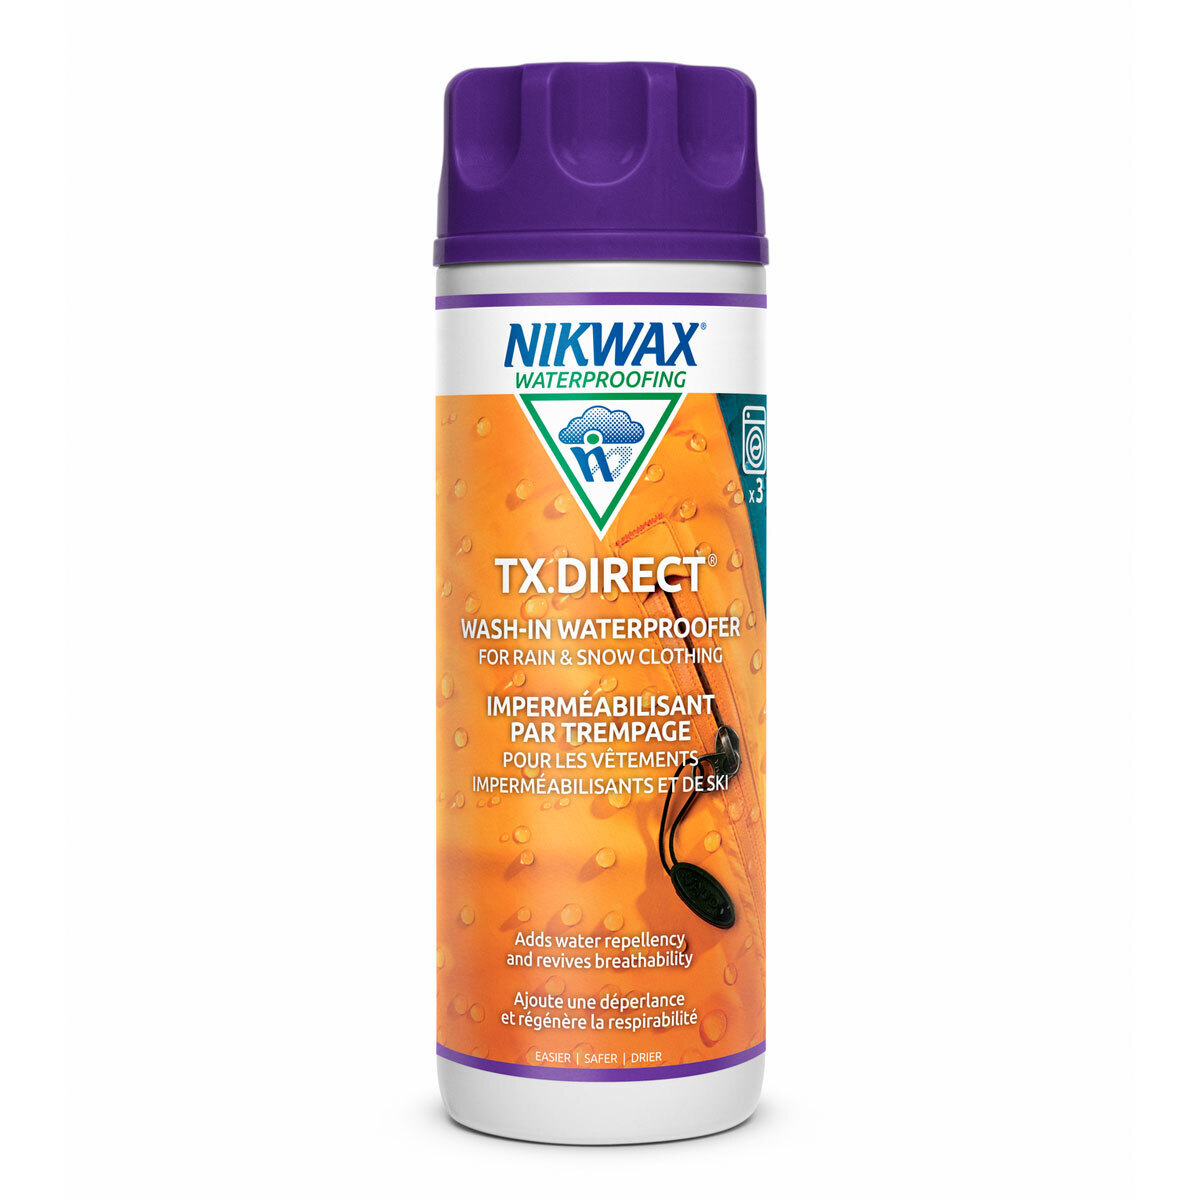 Duluth Pack: Nikwax TX.Direct Spray-On Water-Repellent Treatment - 10 fl.  oz.